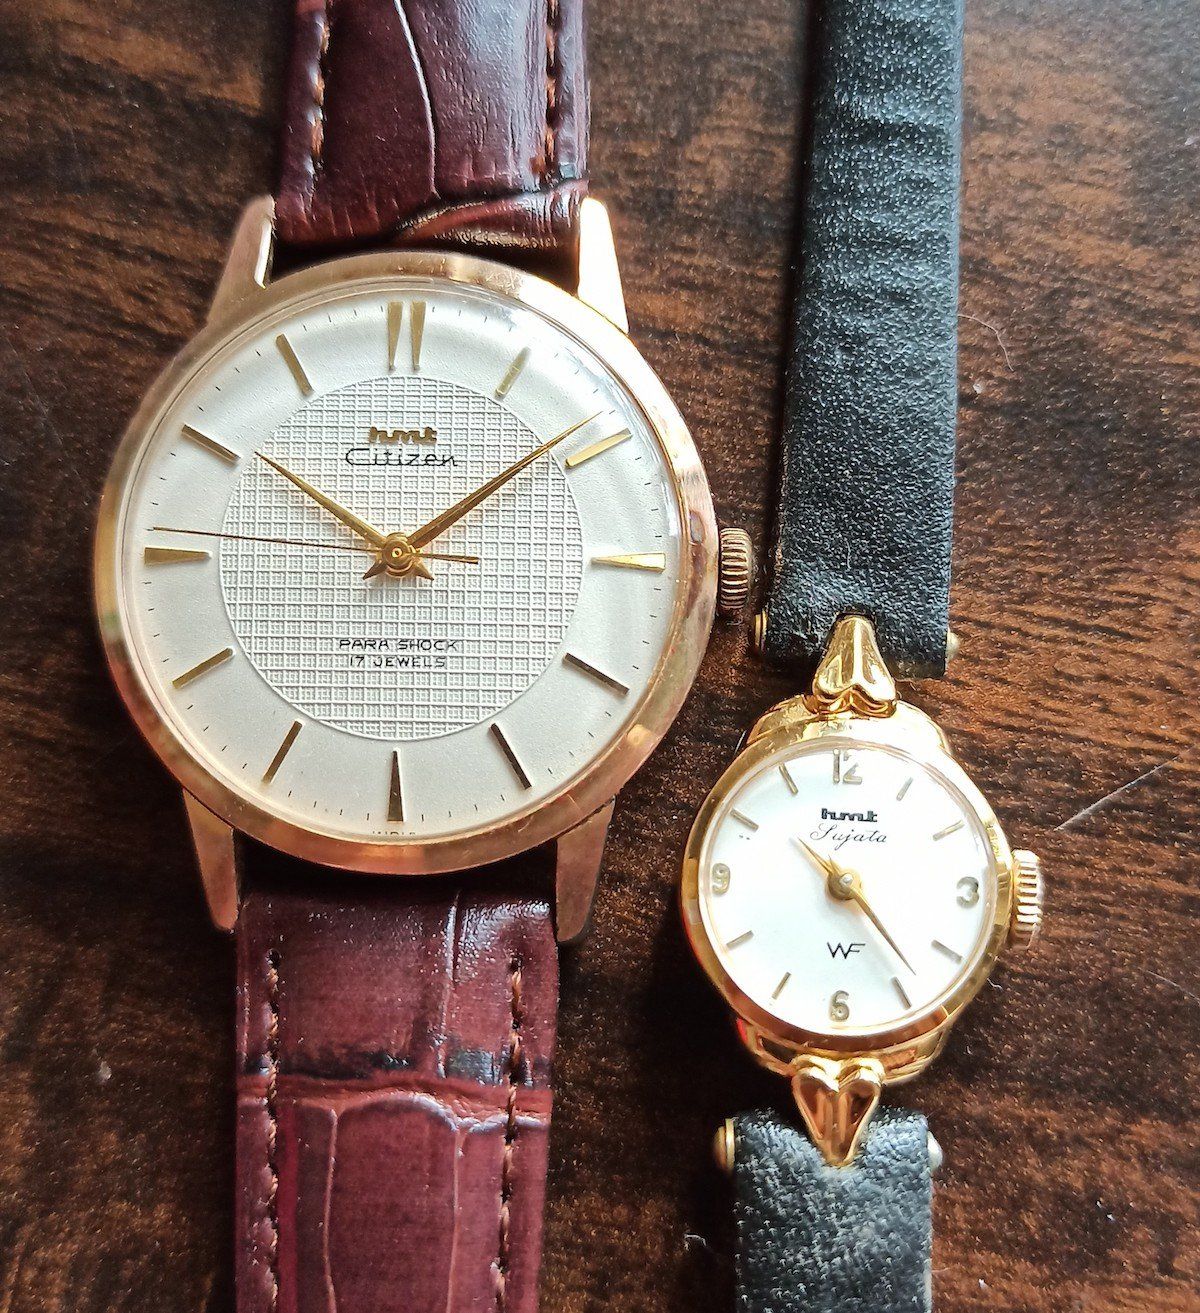 HMT Citizen and HMT Sujata, the first batch of watches from HMT ever